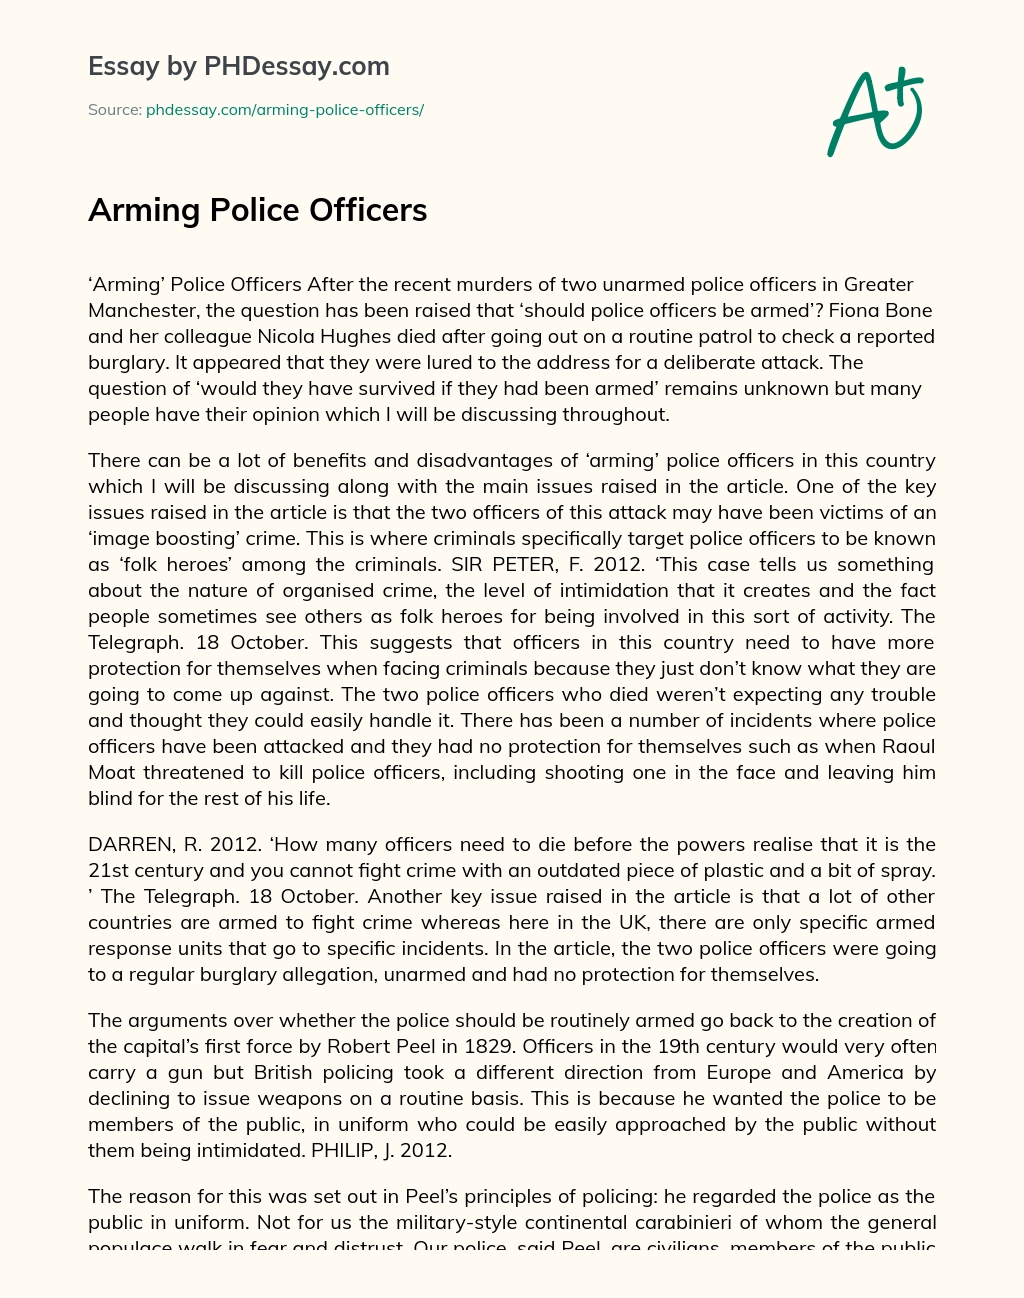 Arming Police Officers essay